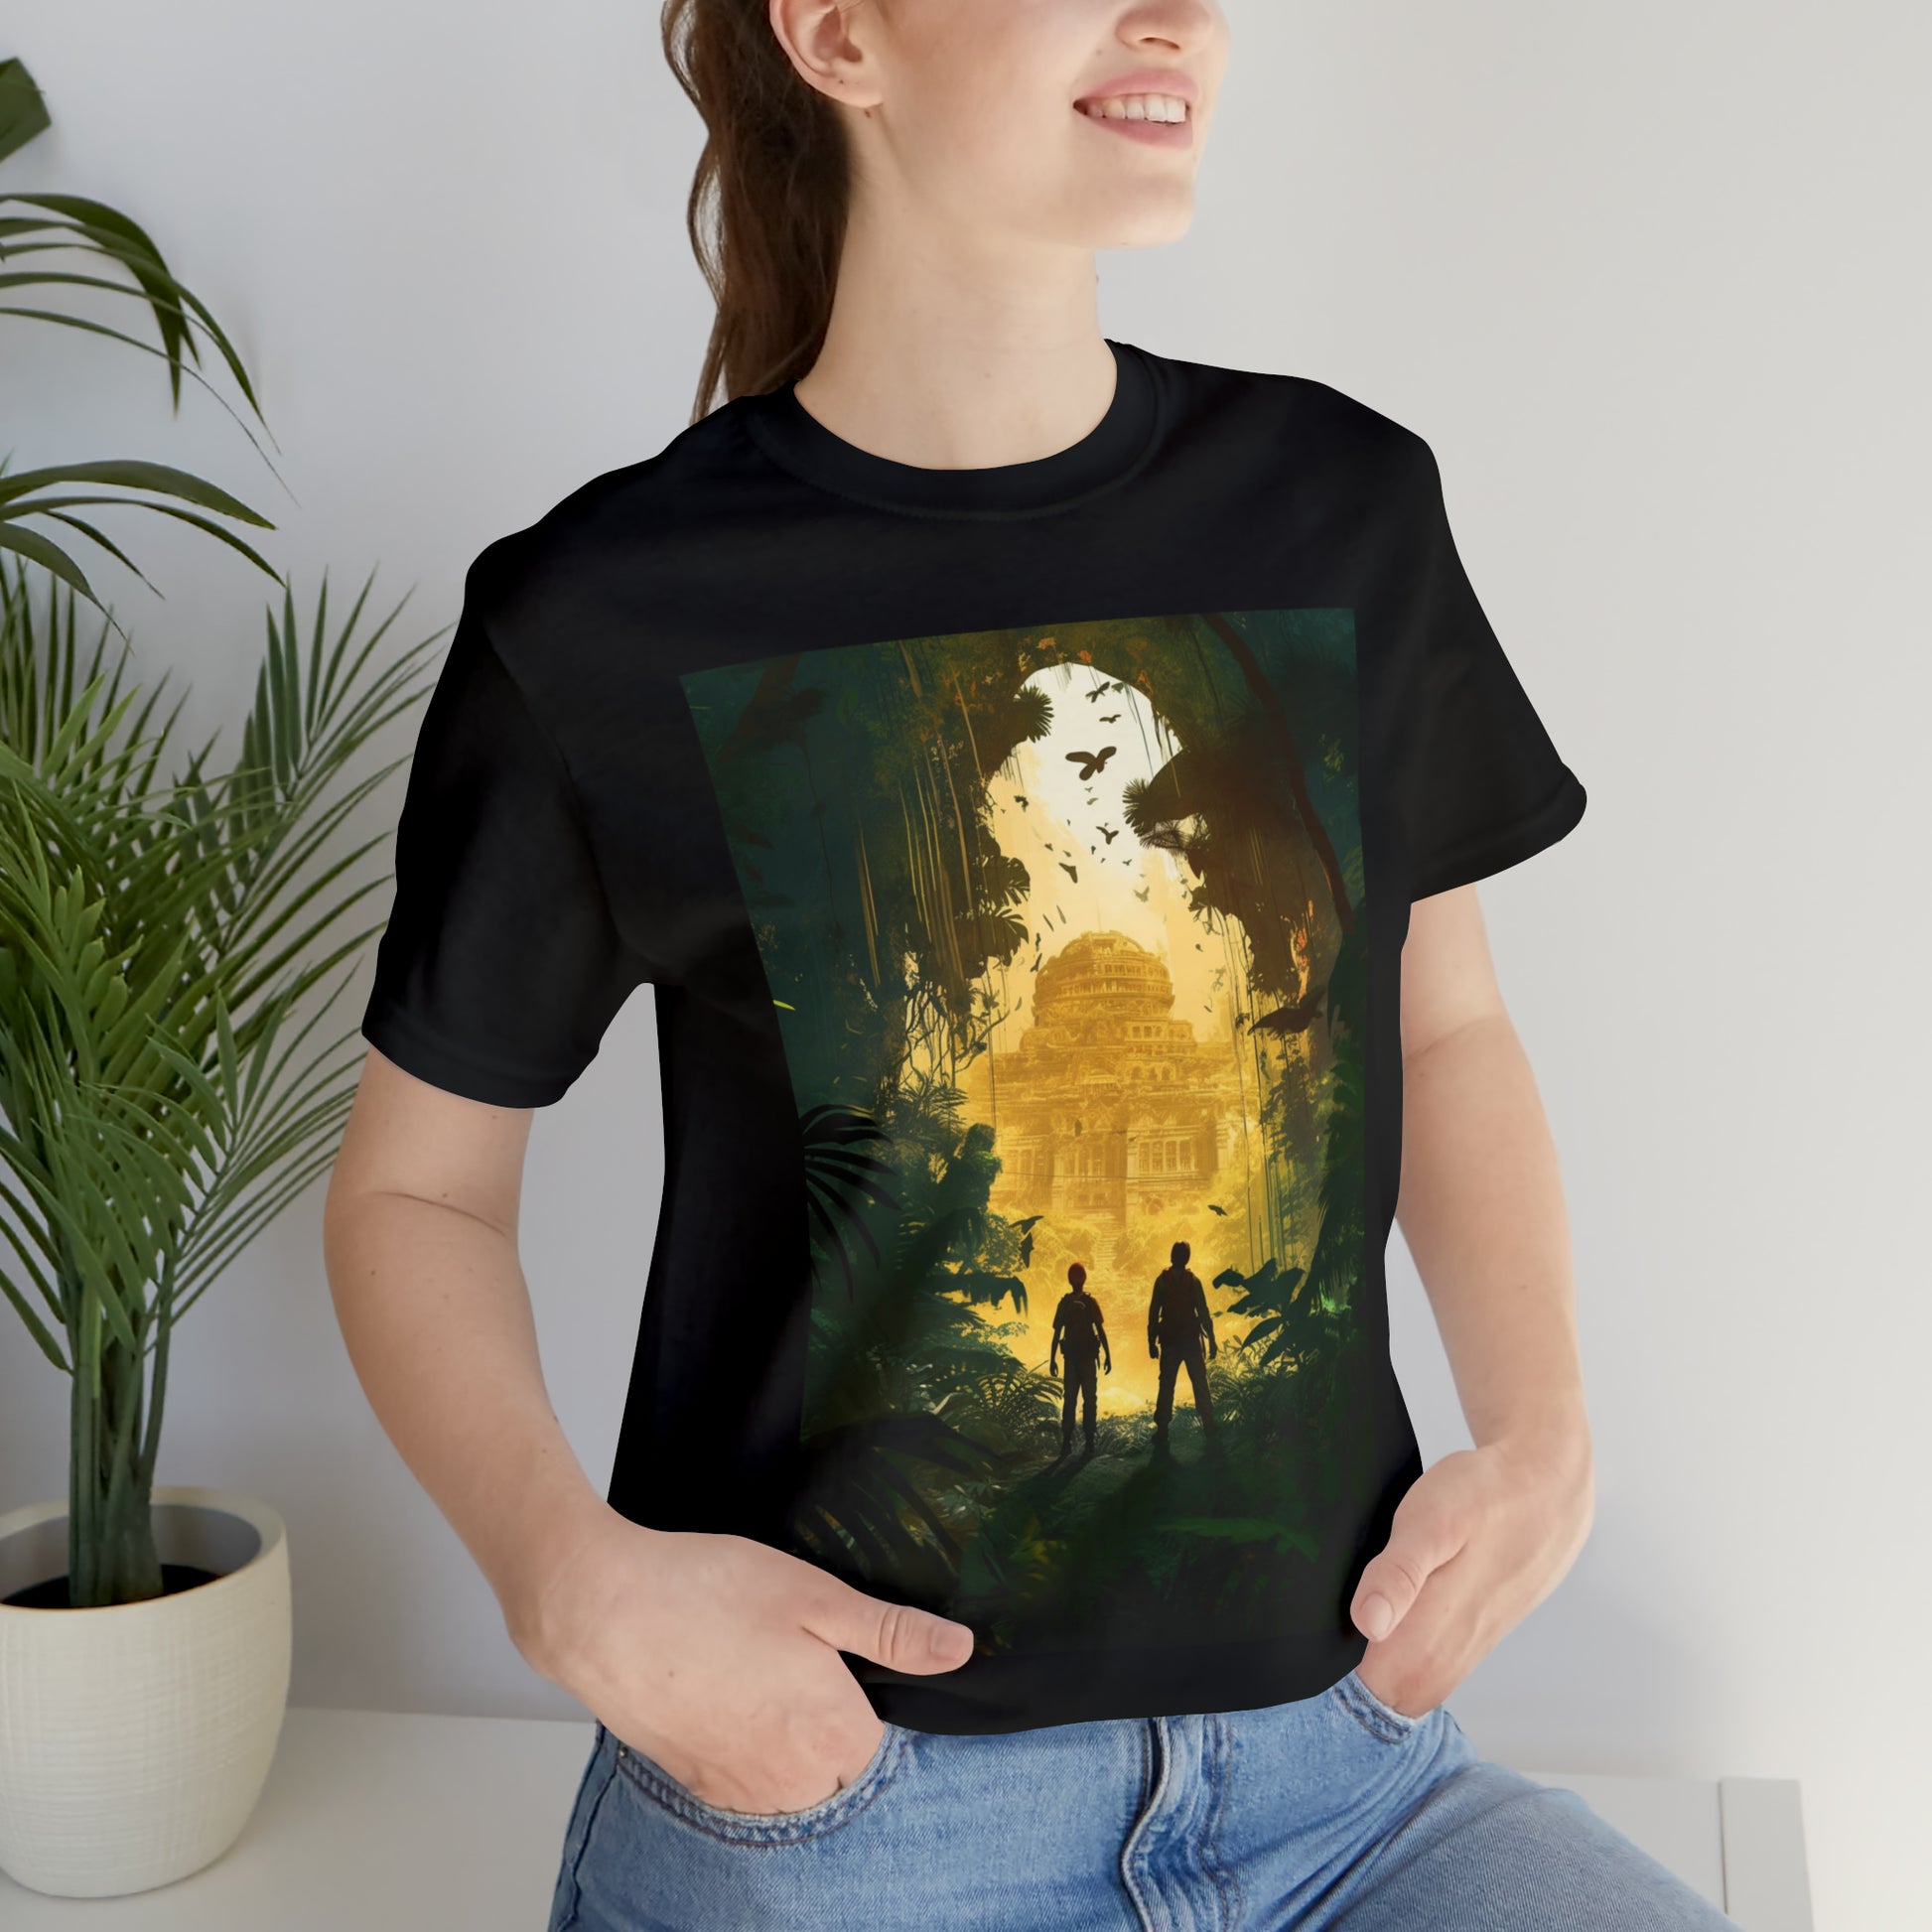 black-quest-thread-tee-shirt-with-ruins-of-arnak-scene-on-front